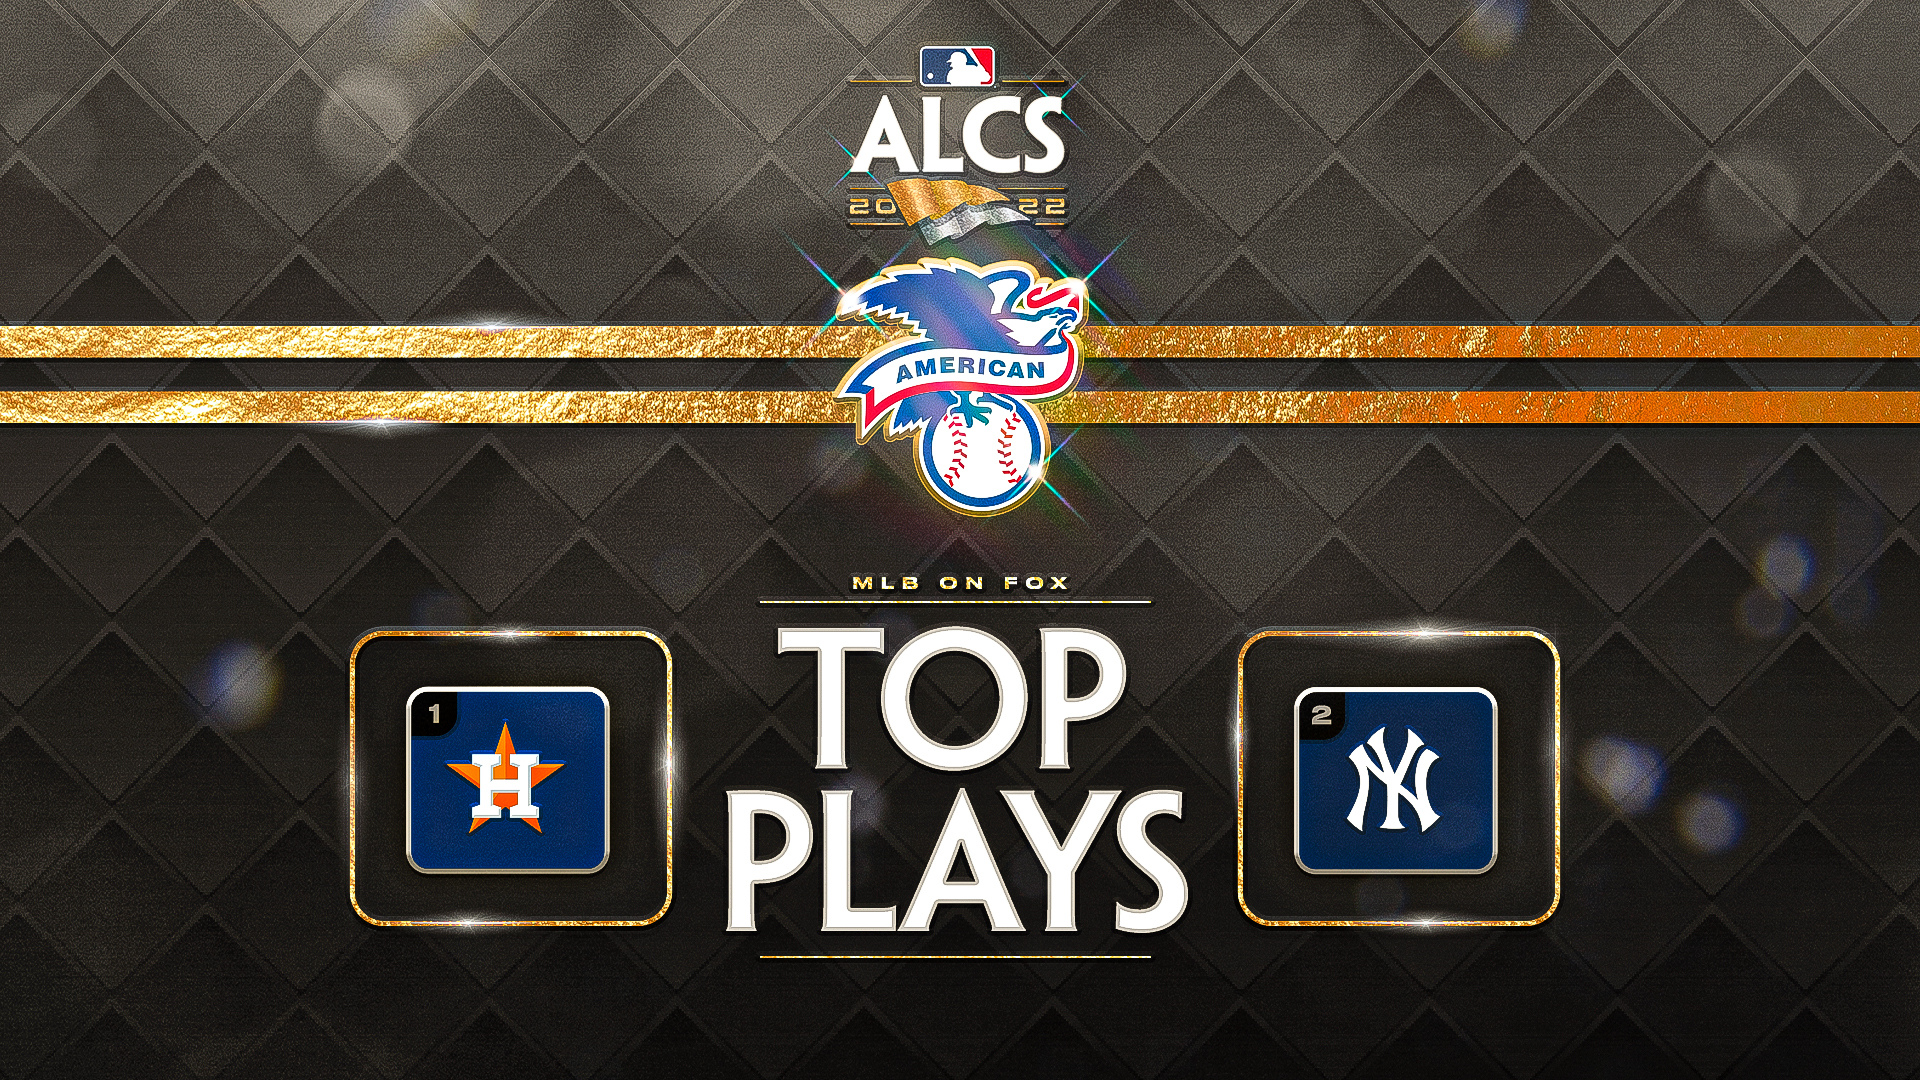 Preview: Astros vs. Yankees in the ALCS –